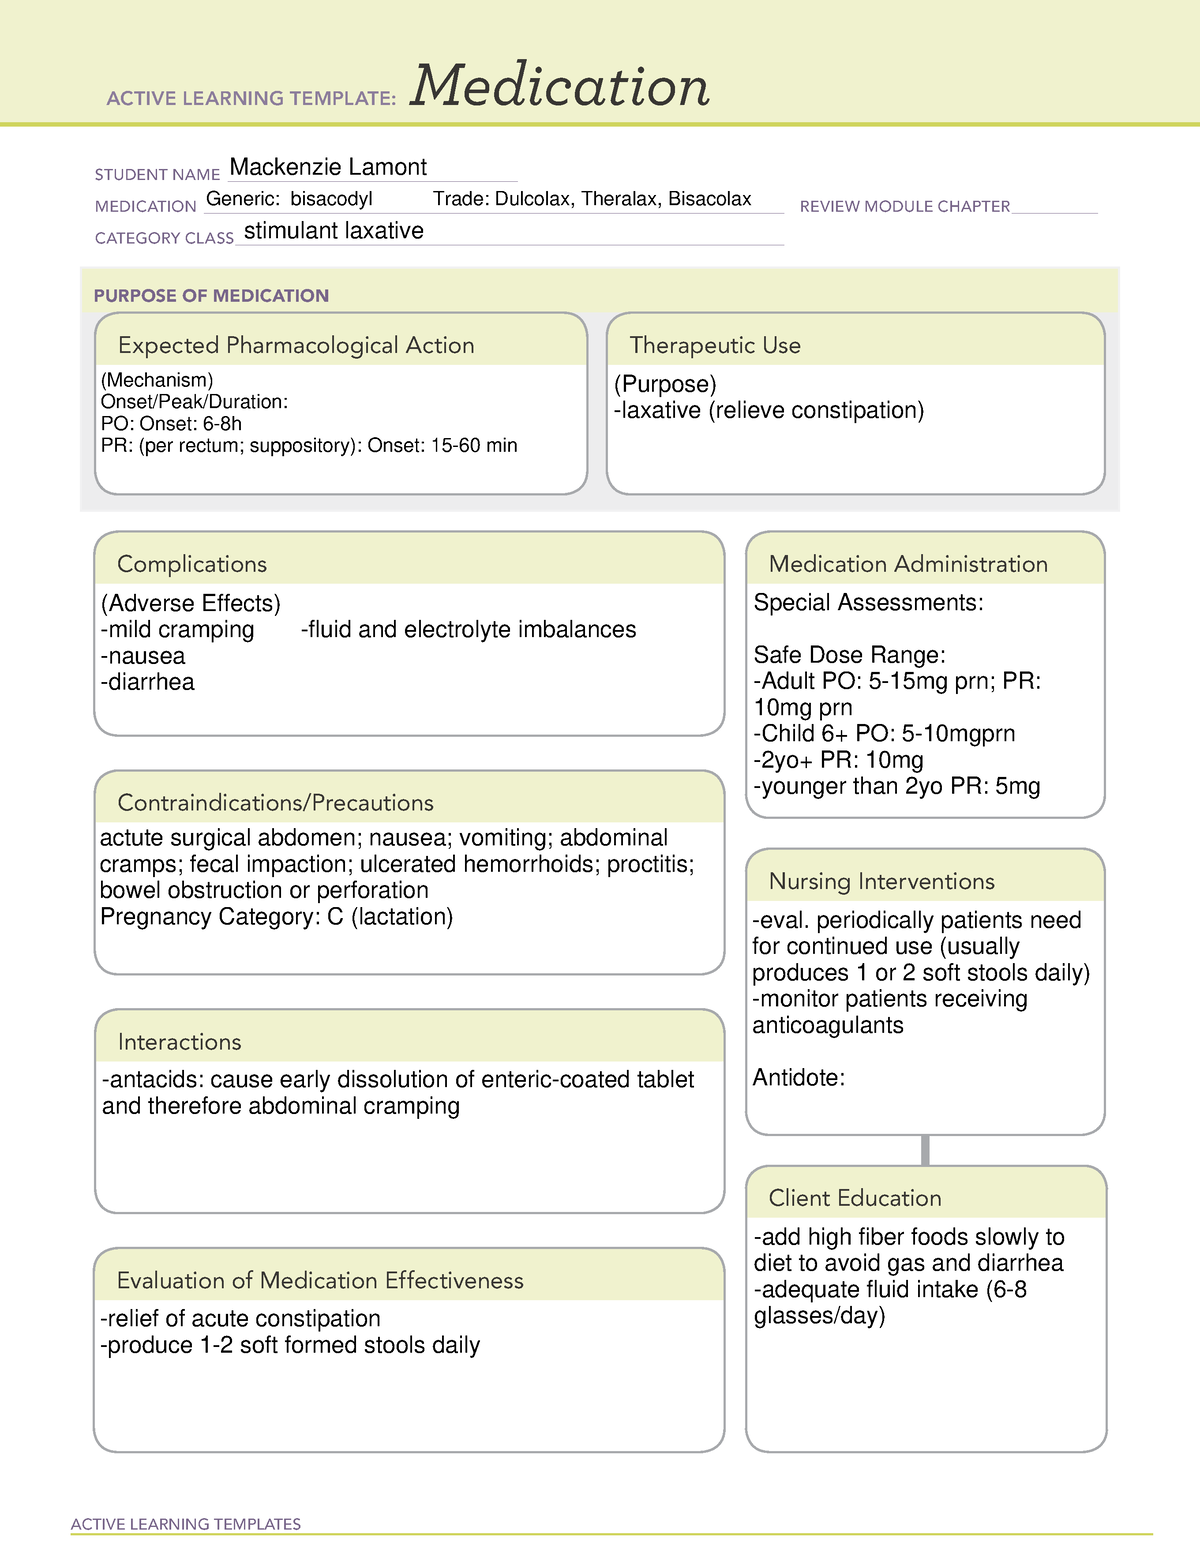 Bisacodyl (Dulcolax) med template ACTIVE LEARNING TEMPLATES